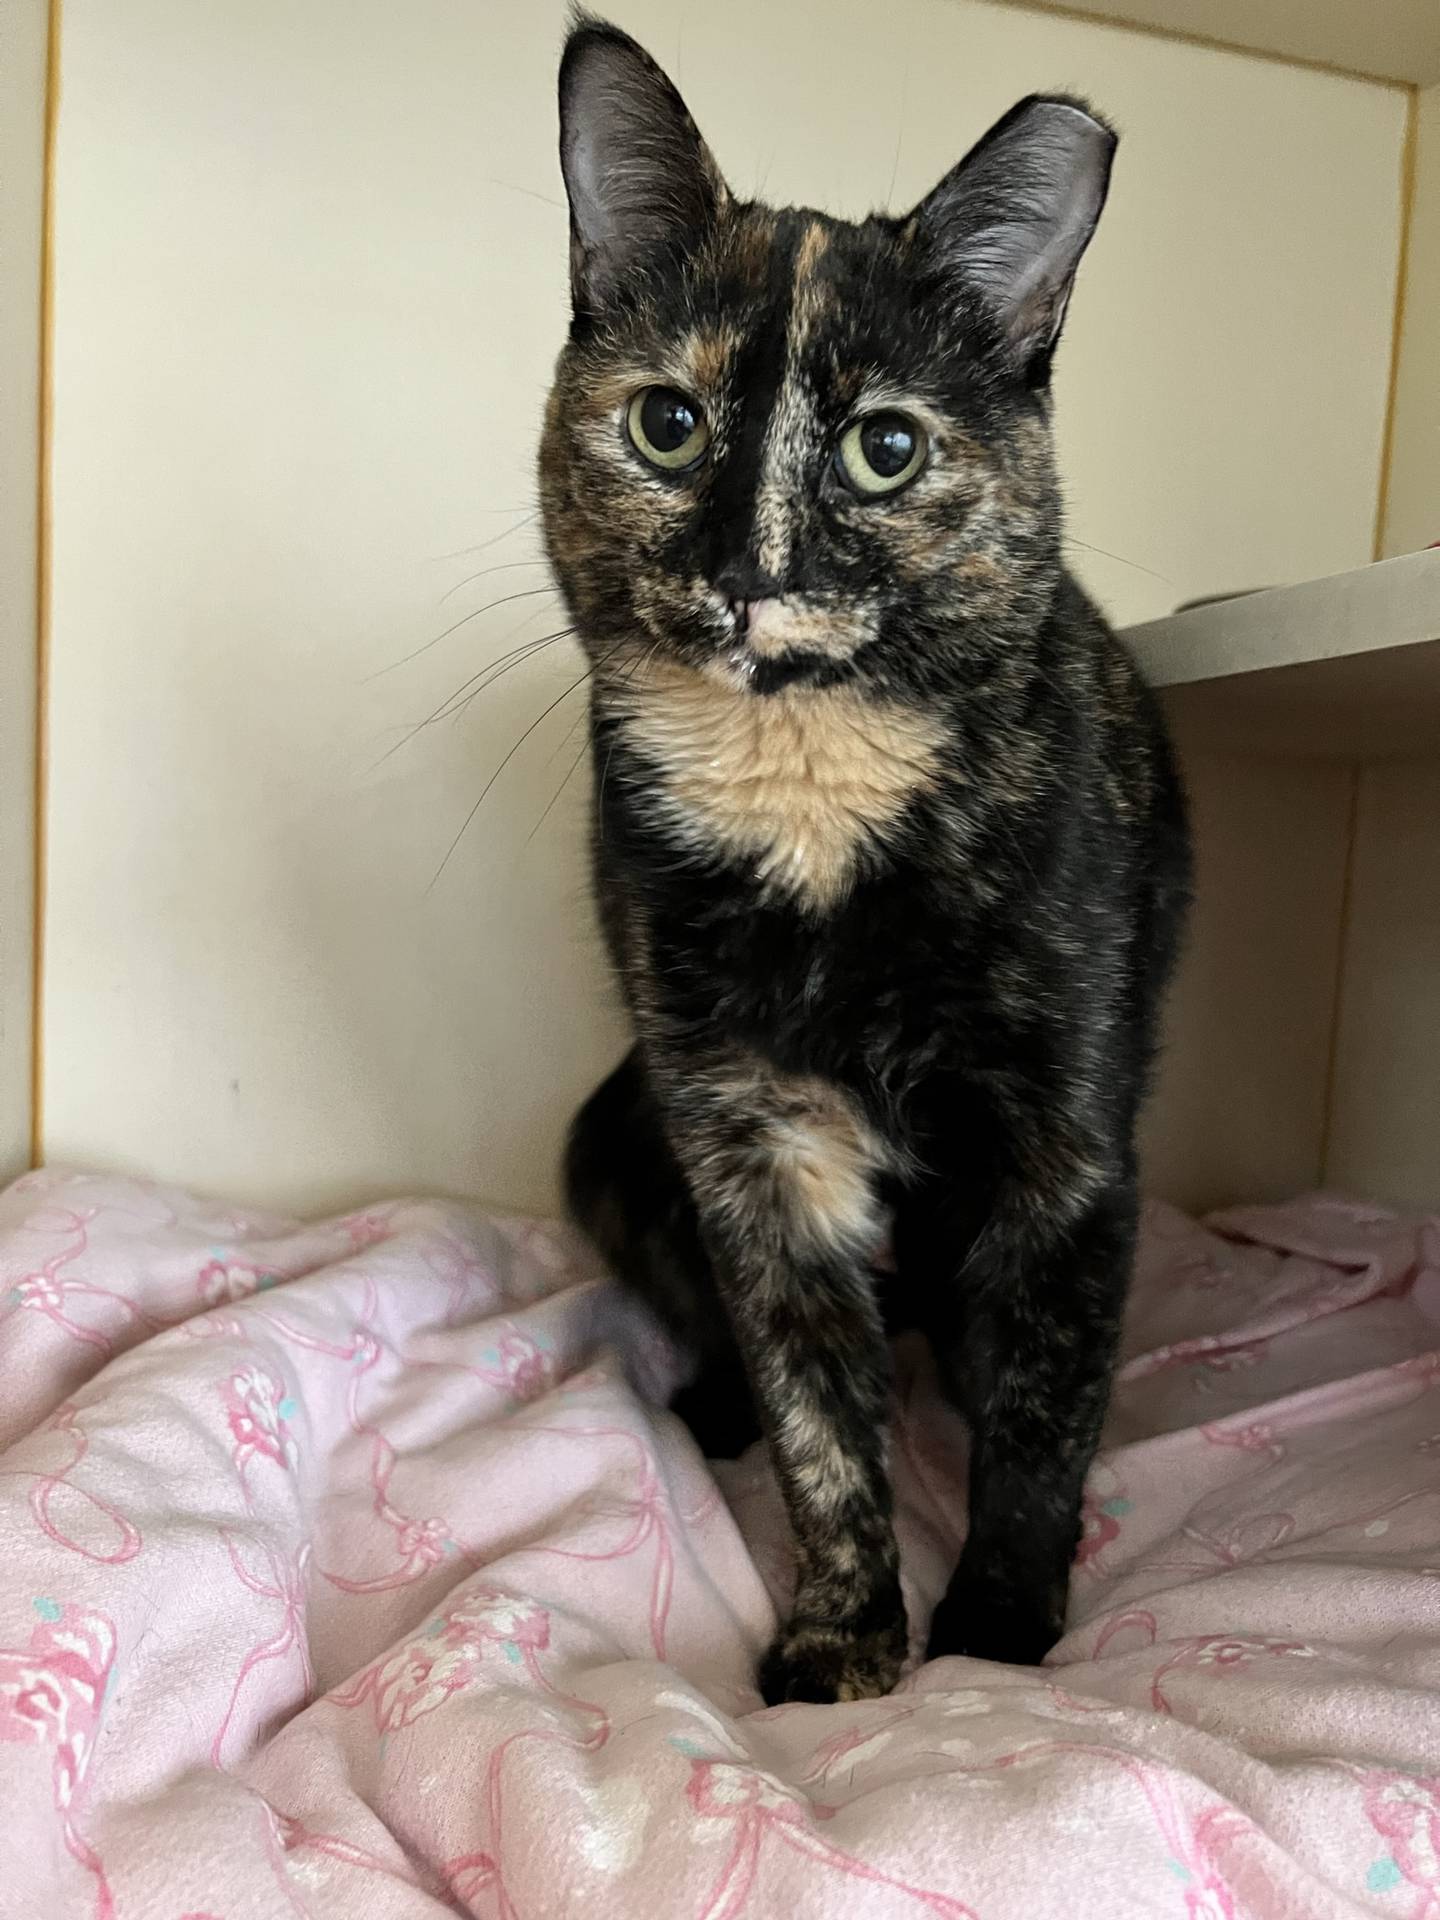 Choti is an 18-month-old petite tortie. She loves pets and will show her appreciation by giving affectionate head rubs. She does well with other cats but loves to play independently. She likes to cuddle, sleep in her foster’s bed and eat treats. To meet Choti, Catadoptions@nawsus.org. Visit nawsus.org.